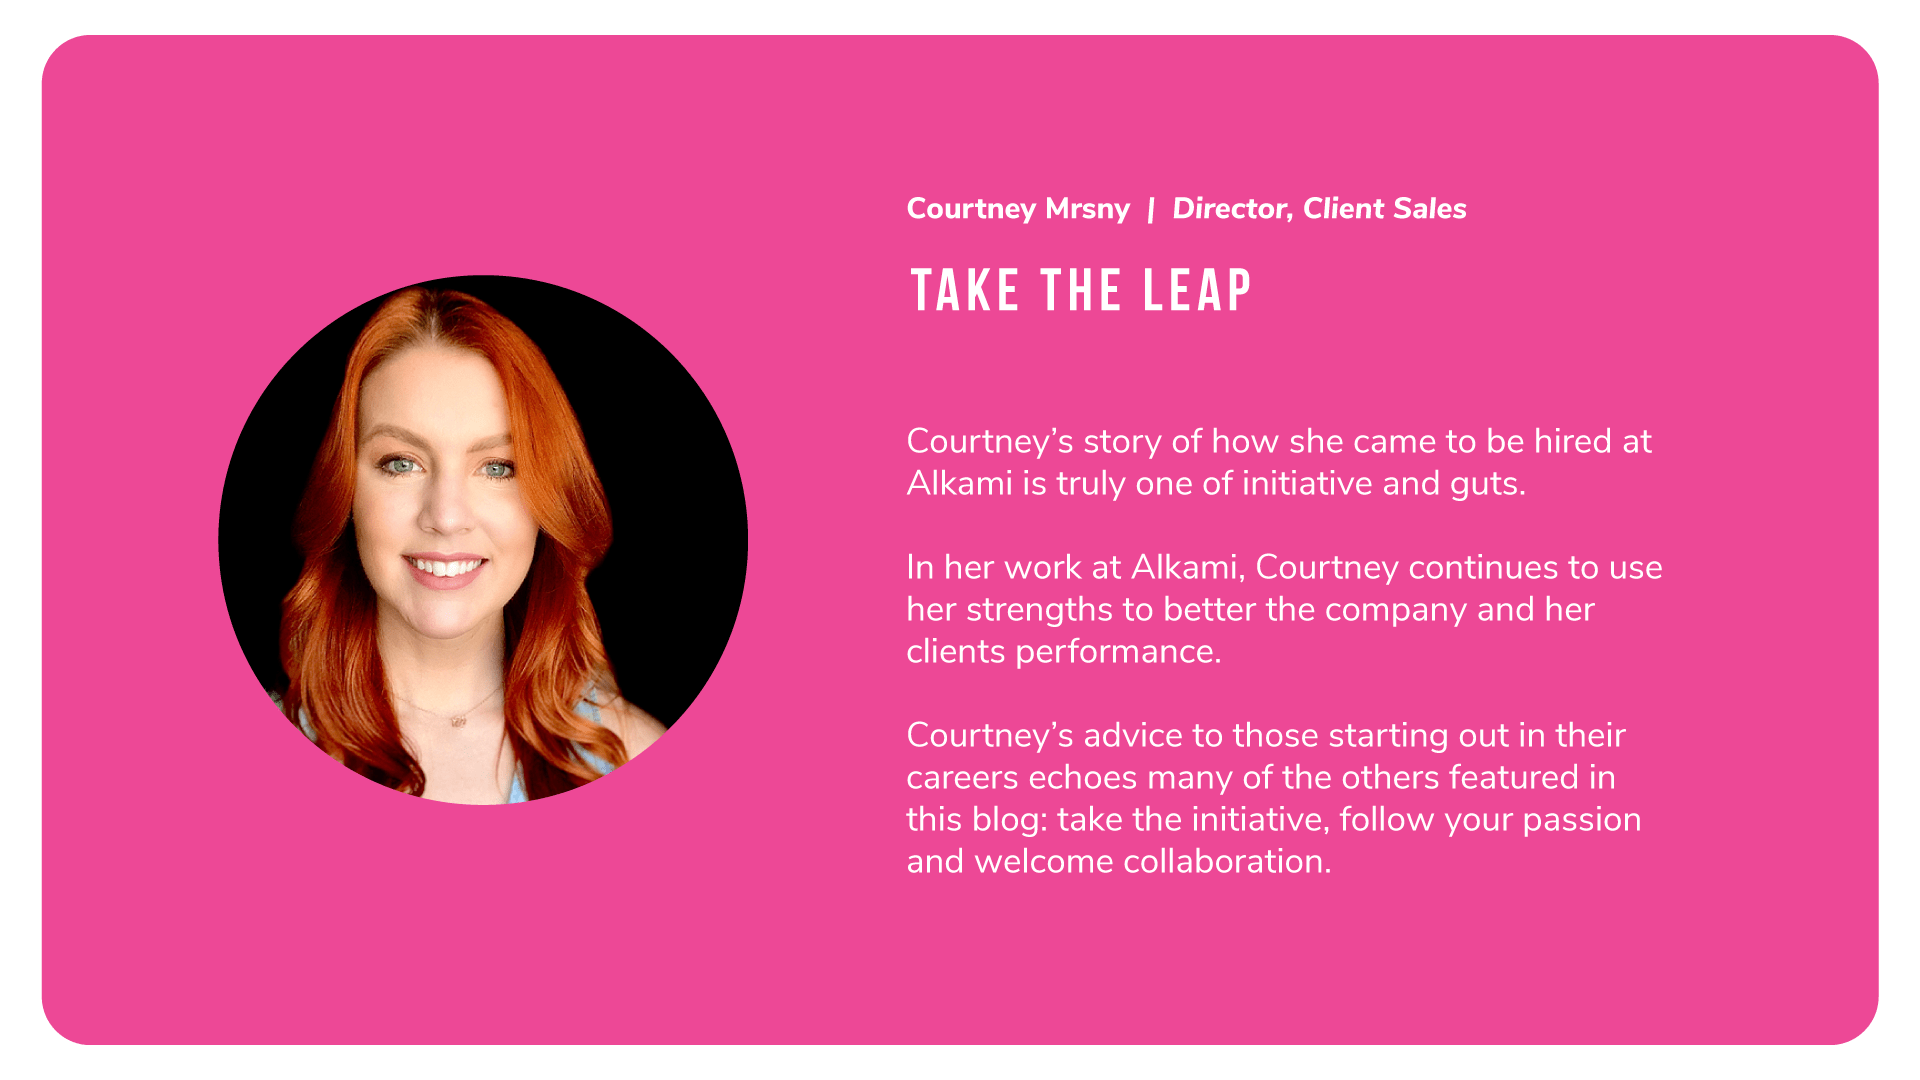 Courtney Mrsny of Alkami says: Take the leap